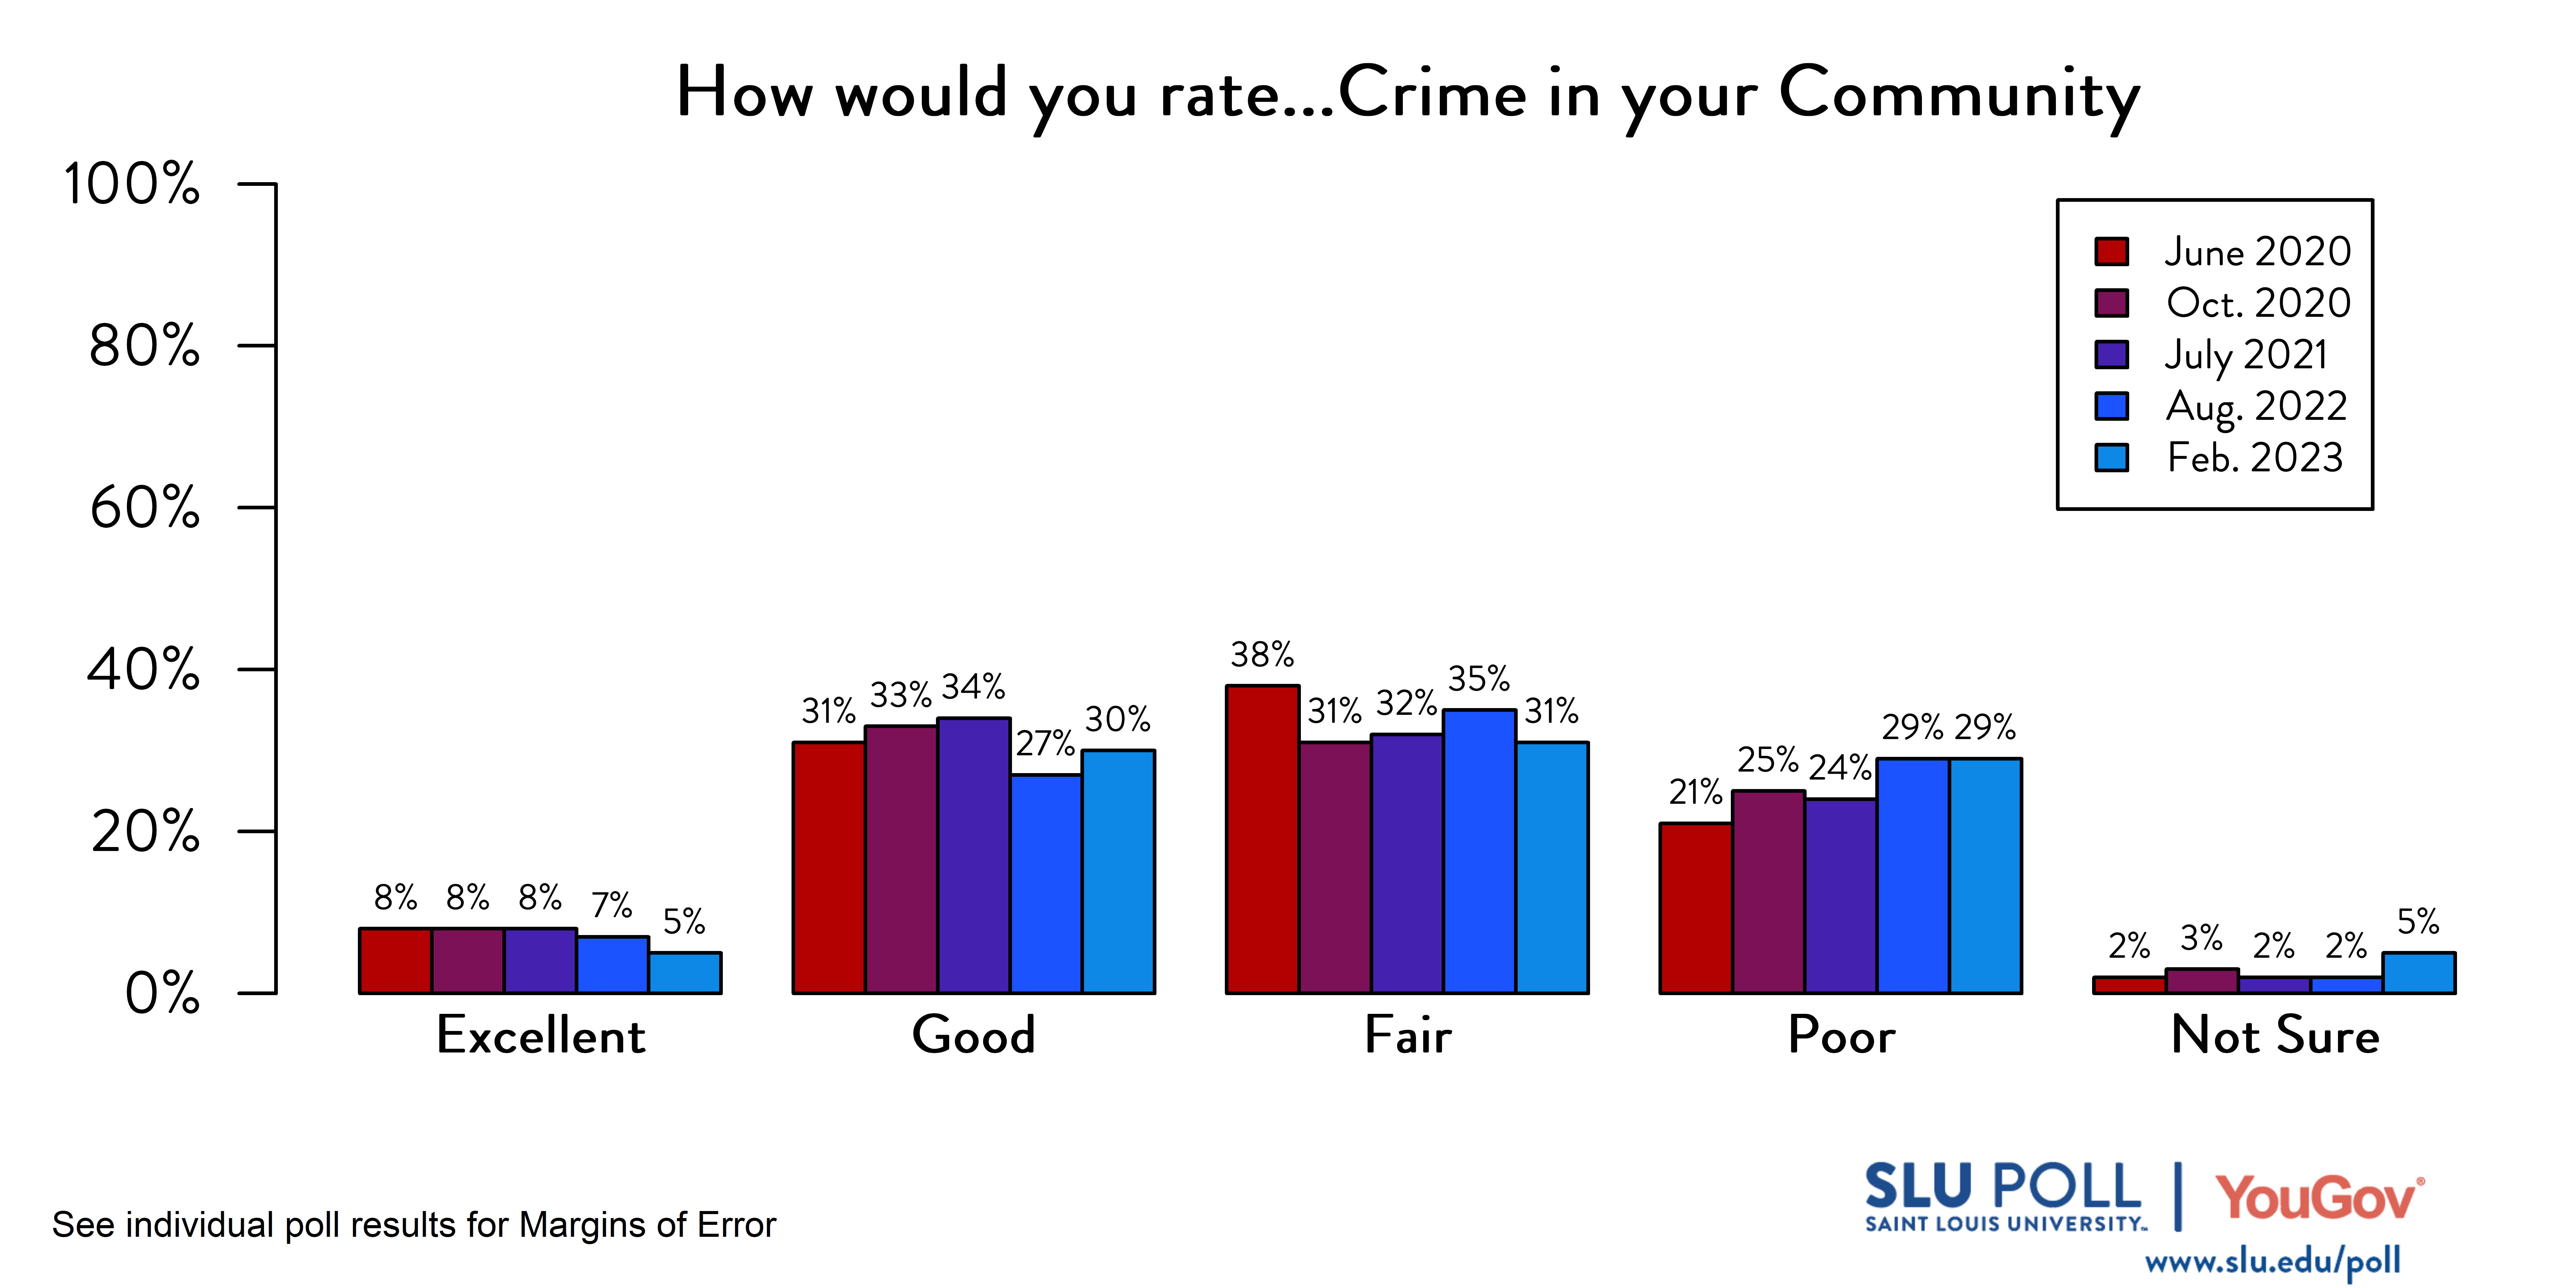 Likely voters' responses to 'How would you rate the condition of the following: Crime in your community?'. June 2020 Voter Responses 8% Excellent, 31% Good, 38% Fair, 21% Poor, and 2% Not Sure. October 2020 Voter Responses: 8% Excellent, 33% Good, 31% Fair, 25% Poor, and 3% Not sure. July 2021 Voter Responses: 8% Excellent, 34% Good, 32% Fair, 24% Poor, and 2% Not sure. August 2022 Voter Responses: 7% Excellent, 27% Good, 35% Fair, 29% Poor, and 2% Not sure. February 2023 Voter Responses: 5% Excellent, 30% Good, 31% Fair, 29% Poor, and 5% Not sure.